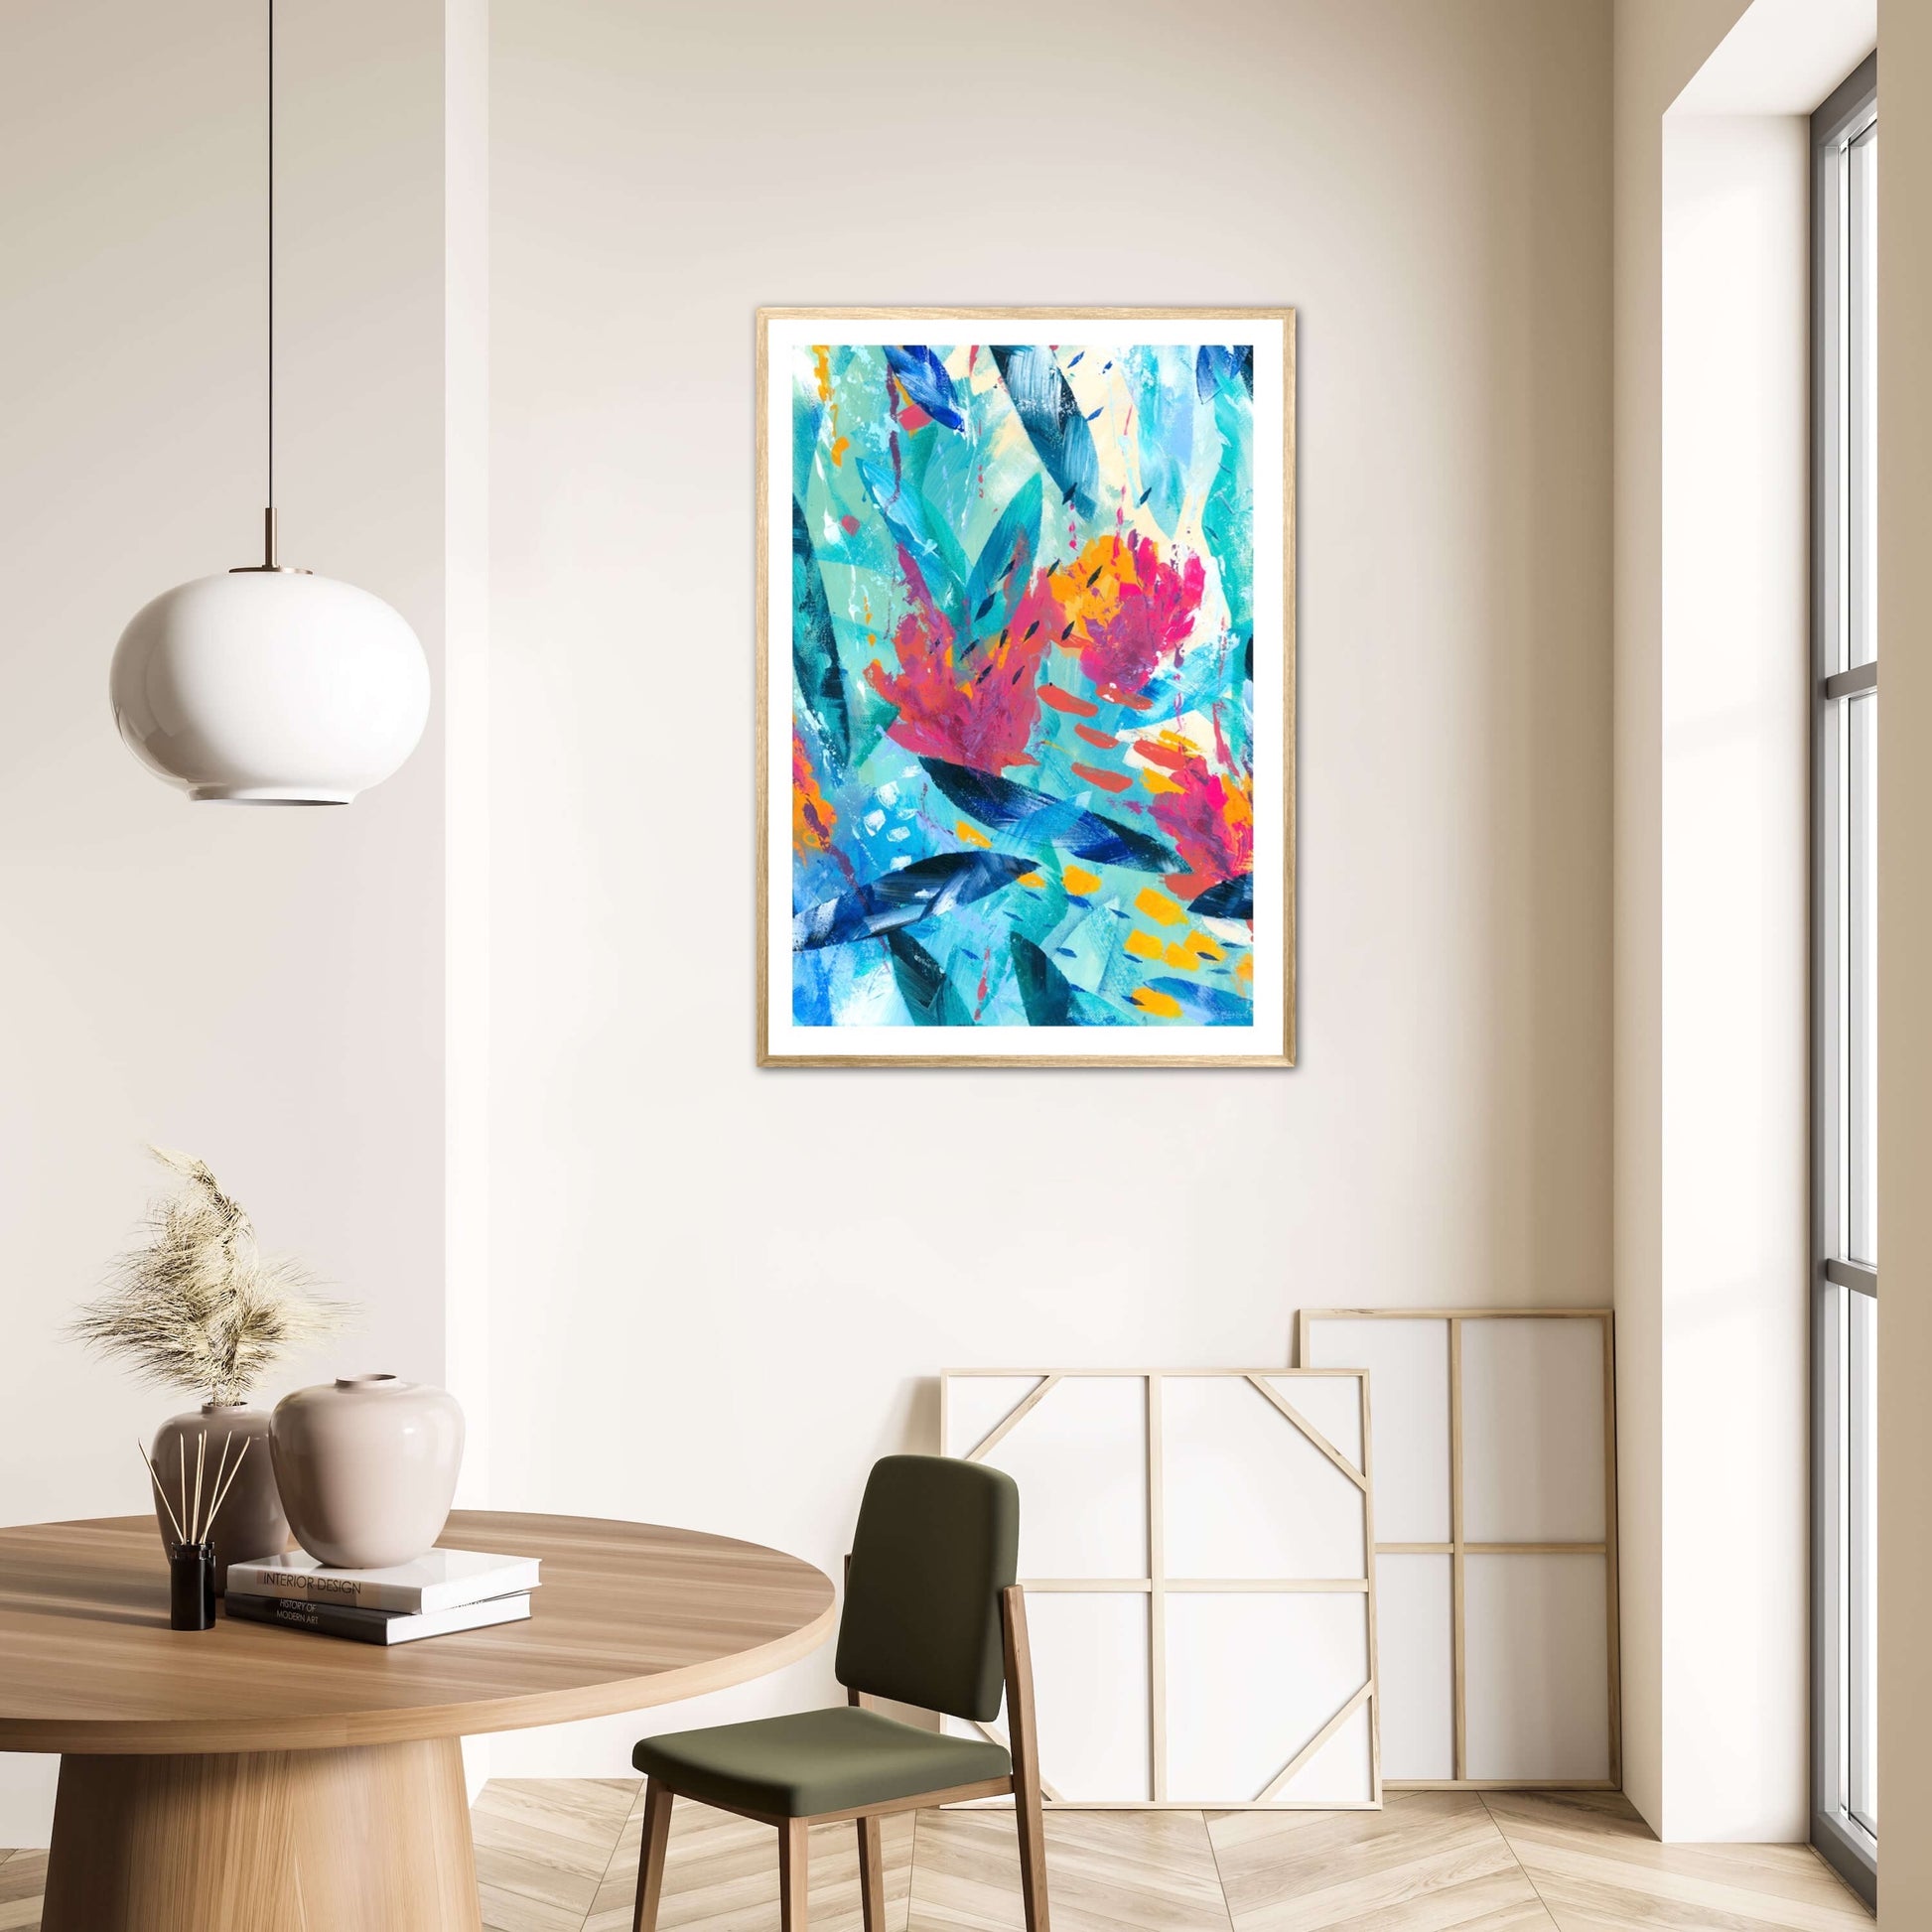 Tropical Seas colourful abstract art print displayed in a natural wood frame on a wall in a neutral interior decor.